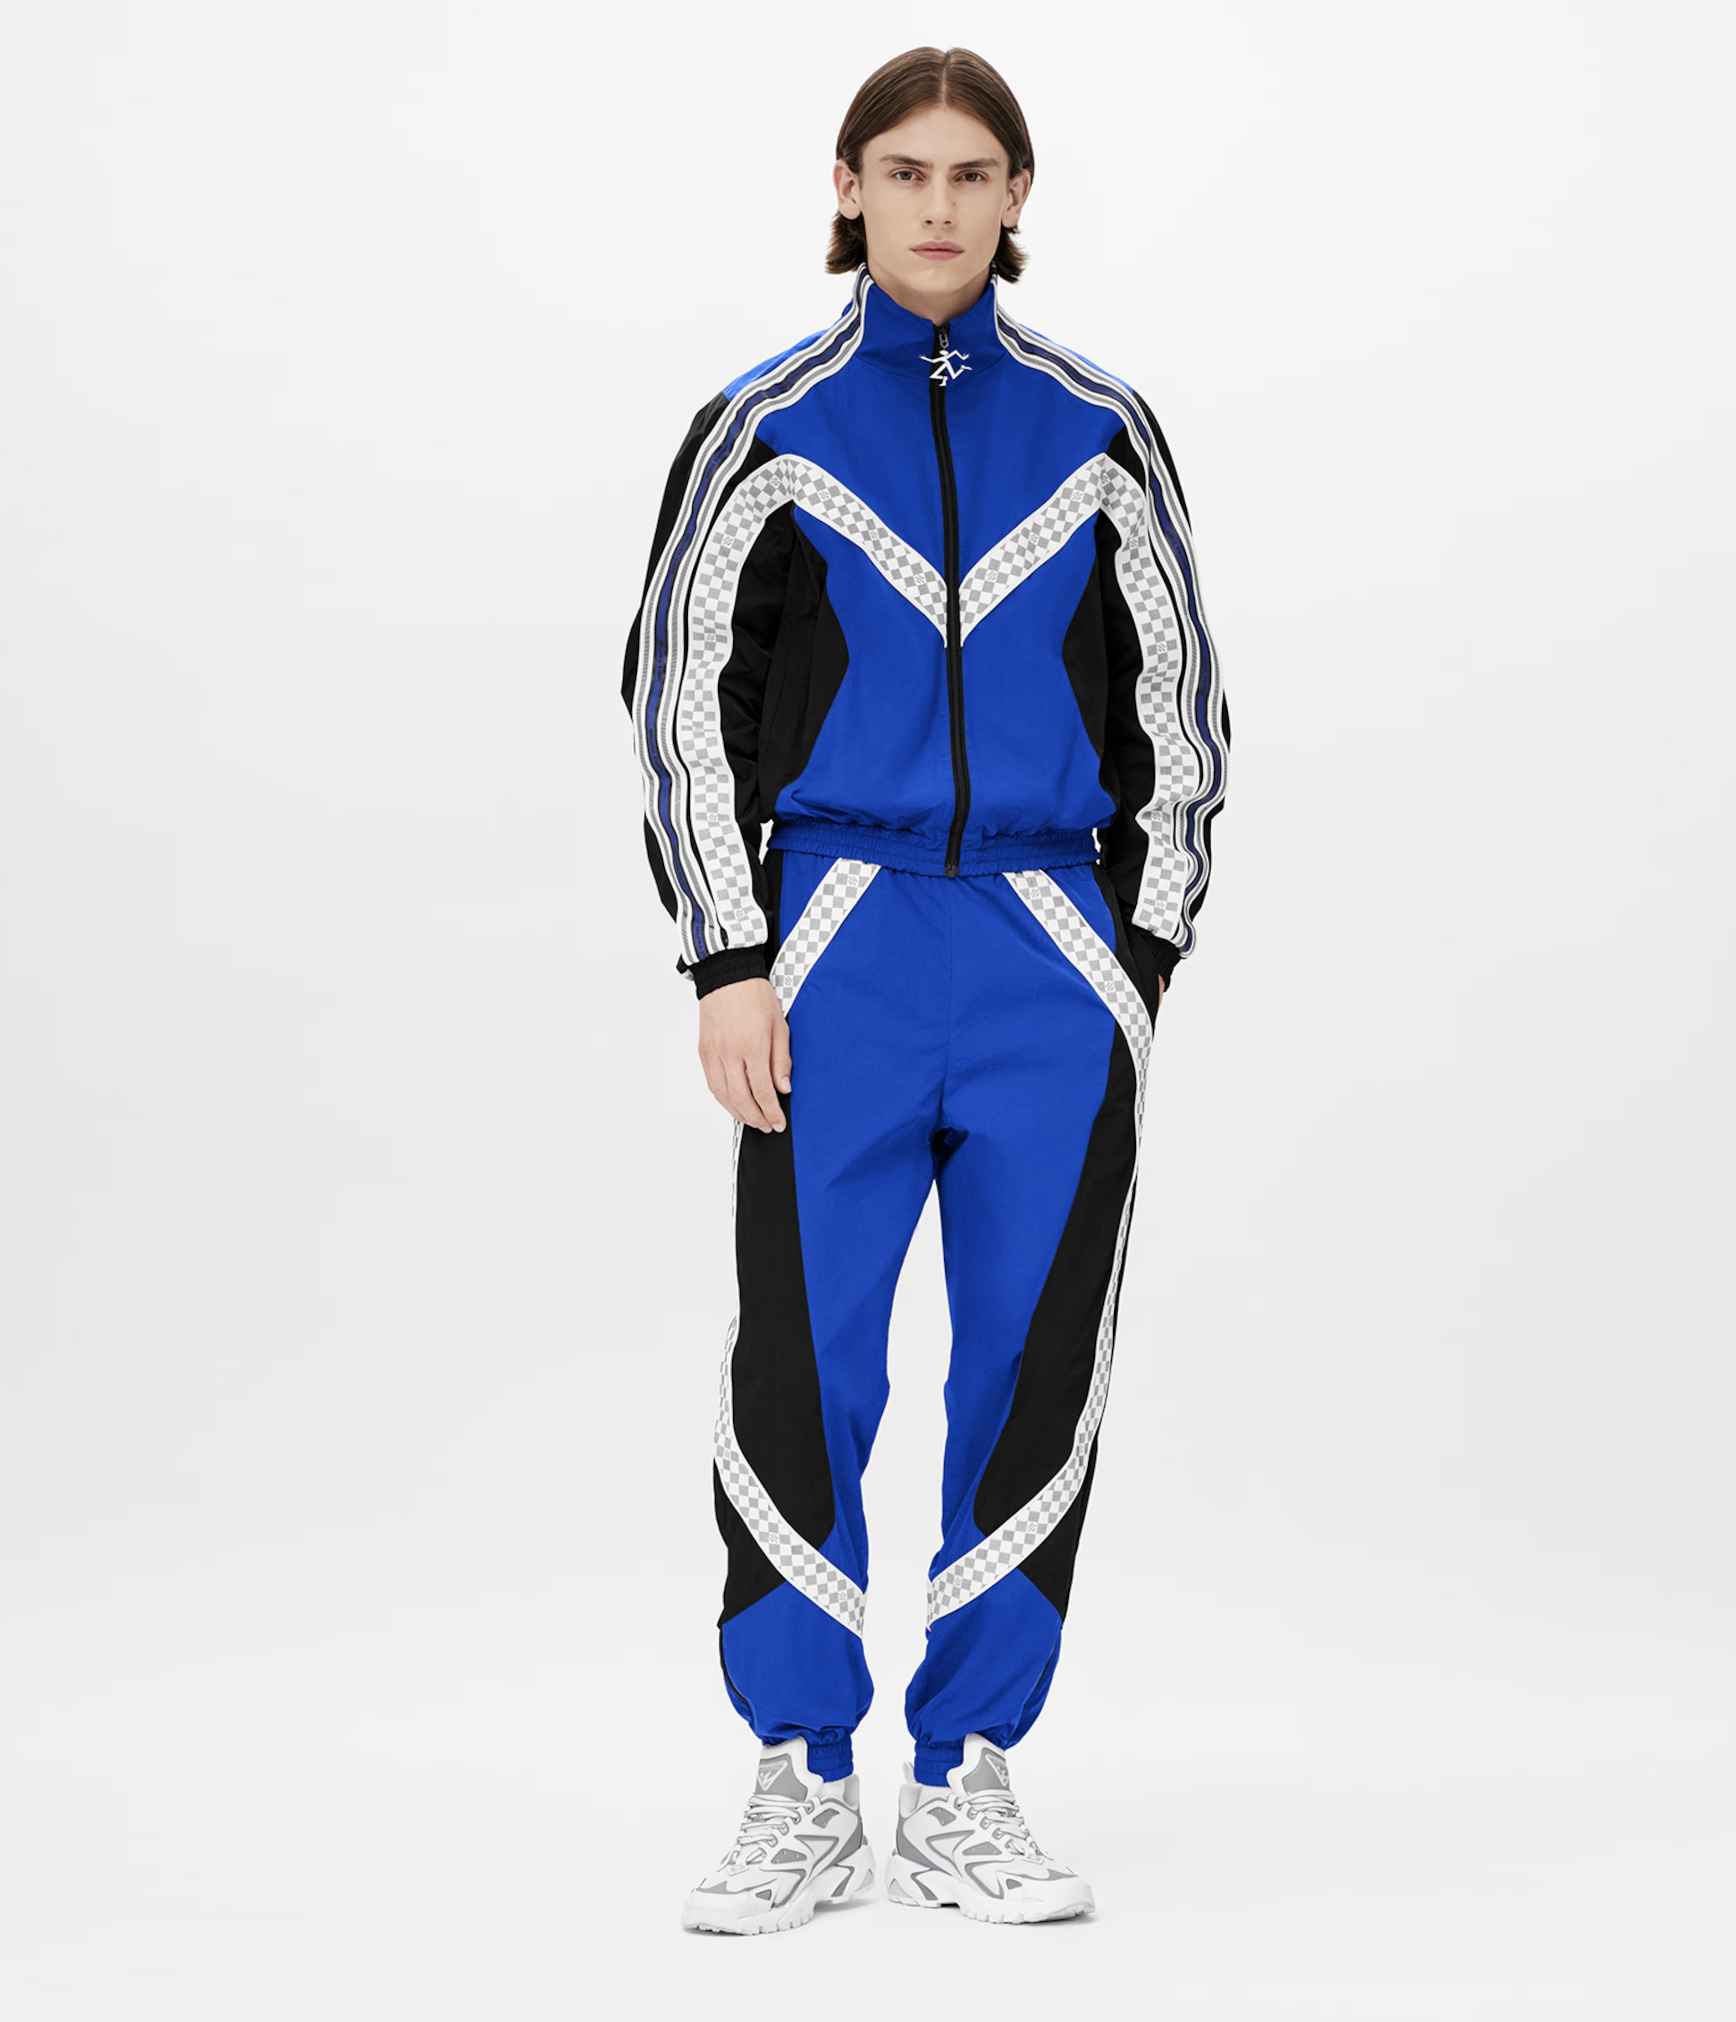 How Sportswear has Infiltrated High Fashion